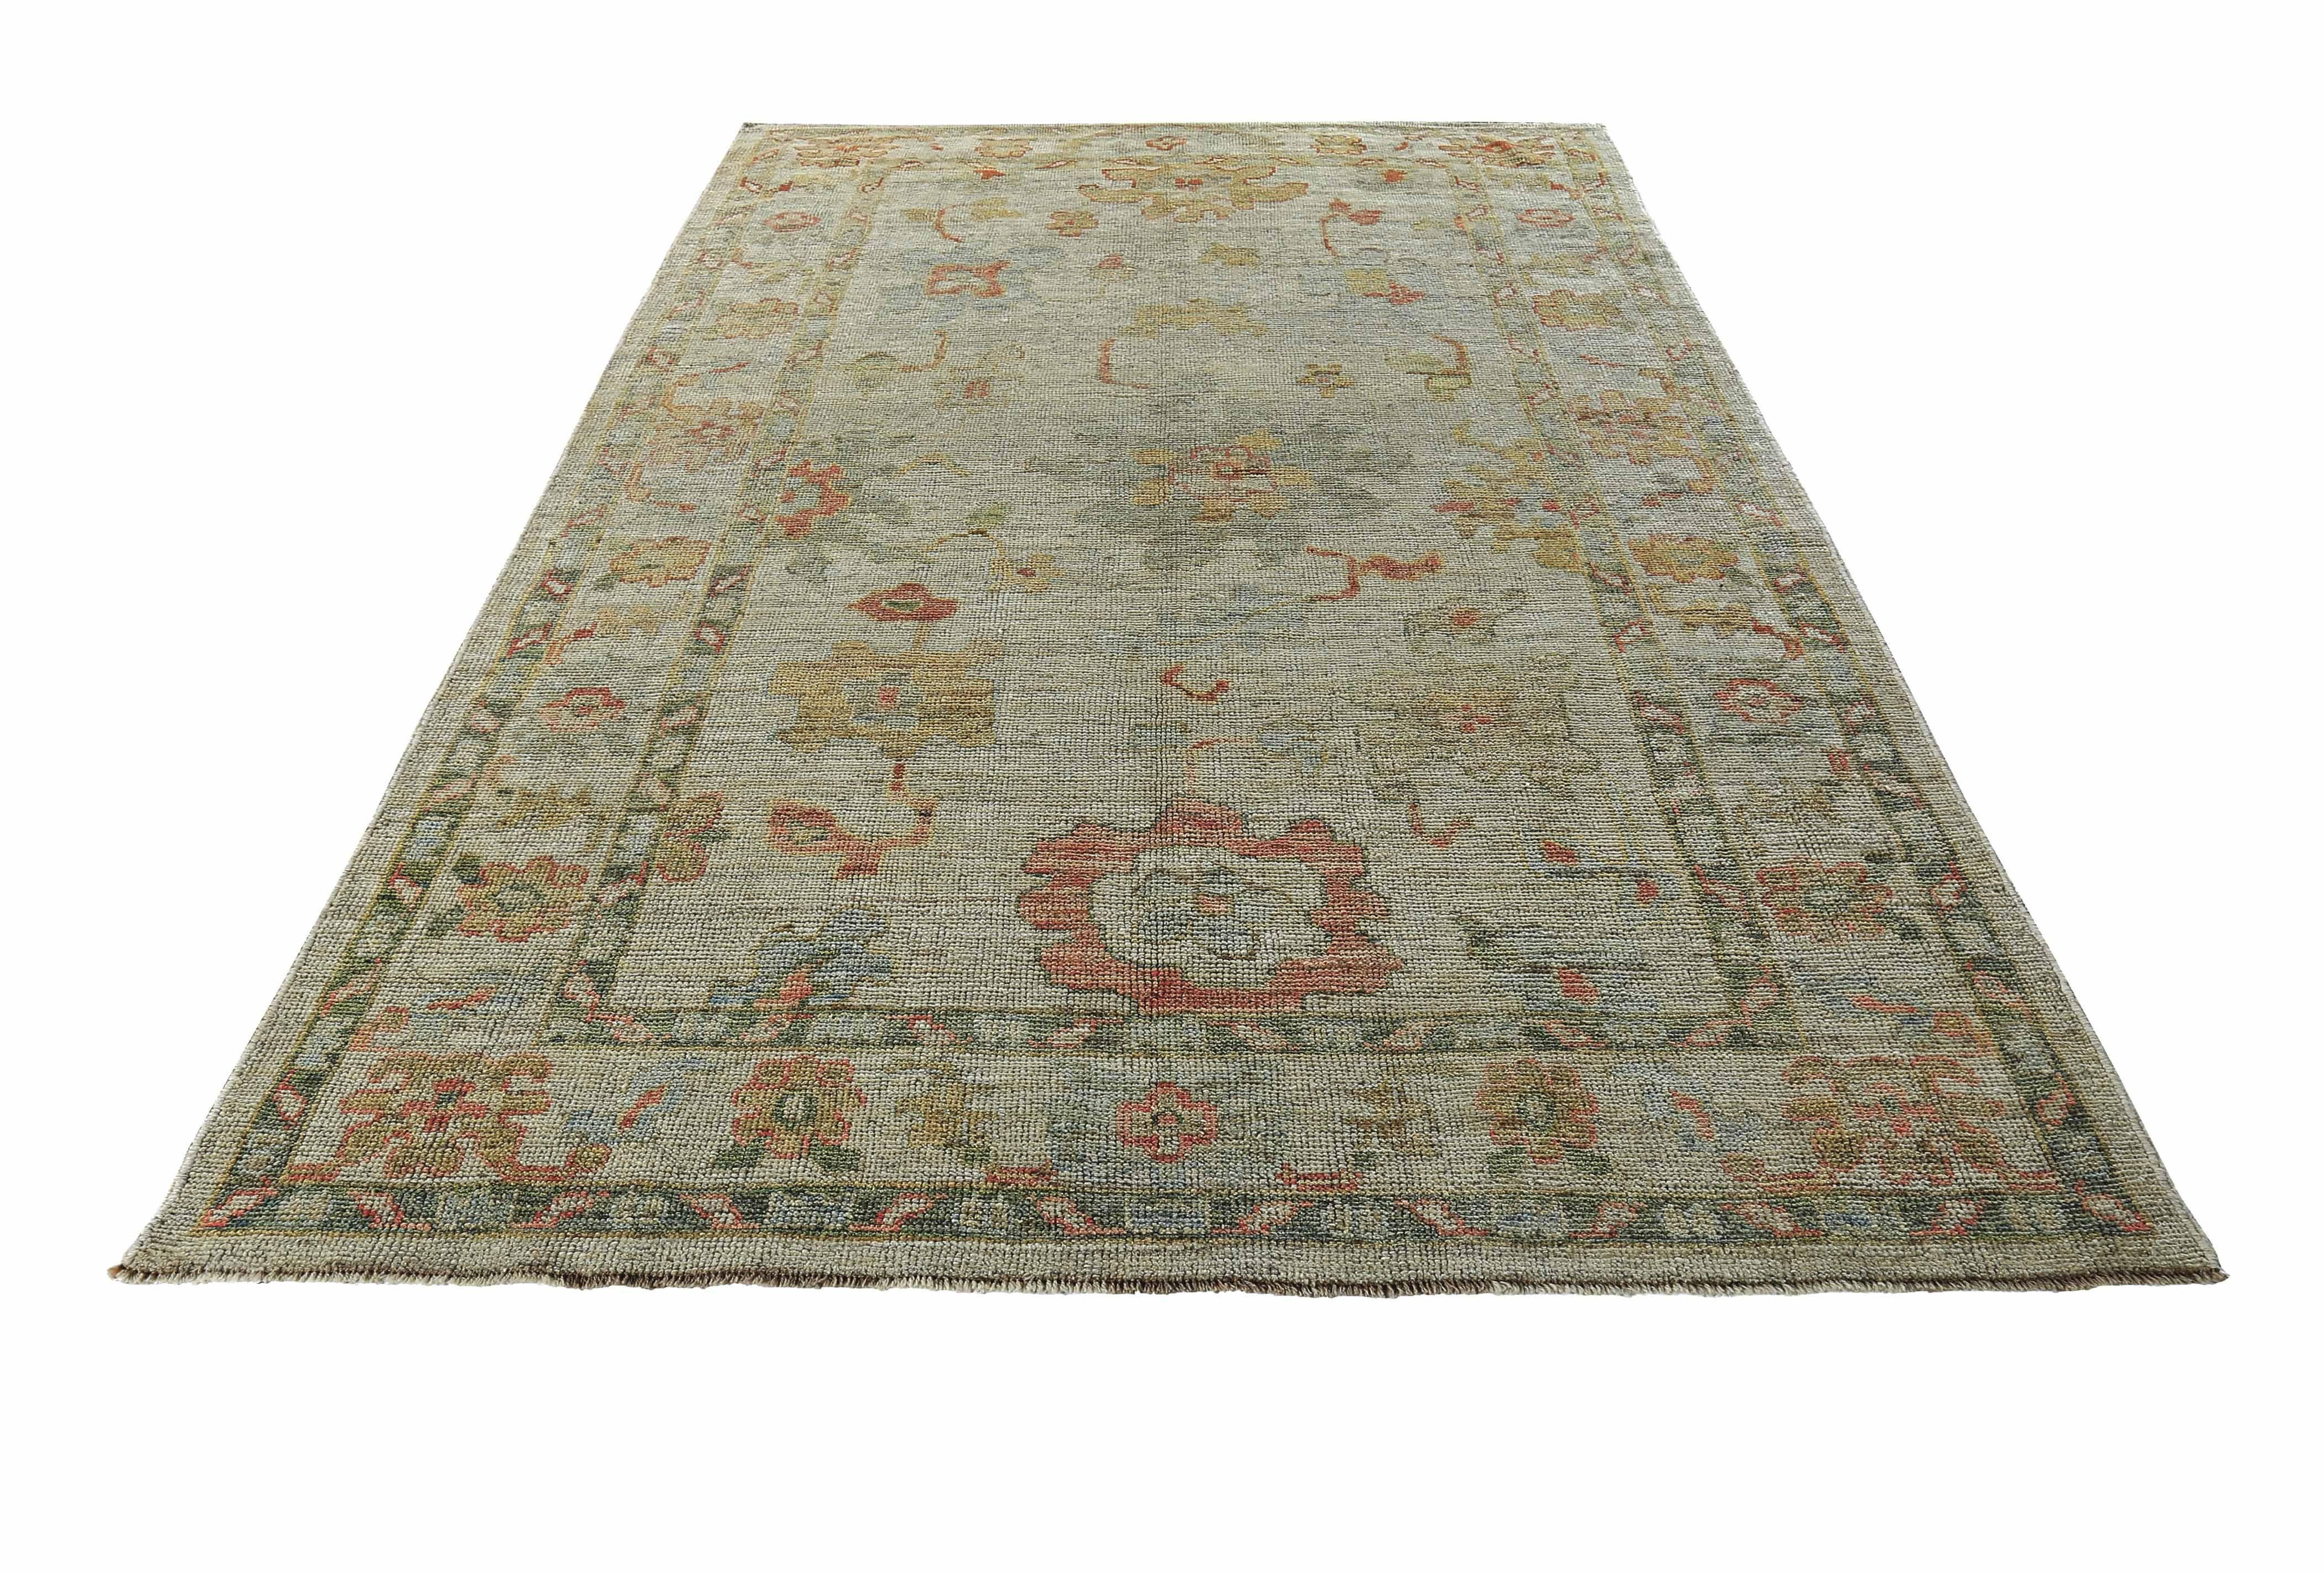 New Turkish rug made of handwoven sheep’s wool of the finest quality. It’s colored with organic vegetable dyes that are certified safe for humans and pets alike. It features pink and golden flower heads adorning an elegant ivory field. Flower